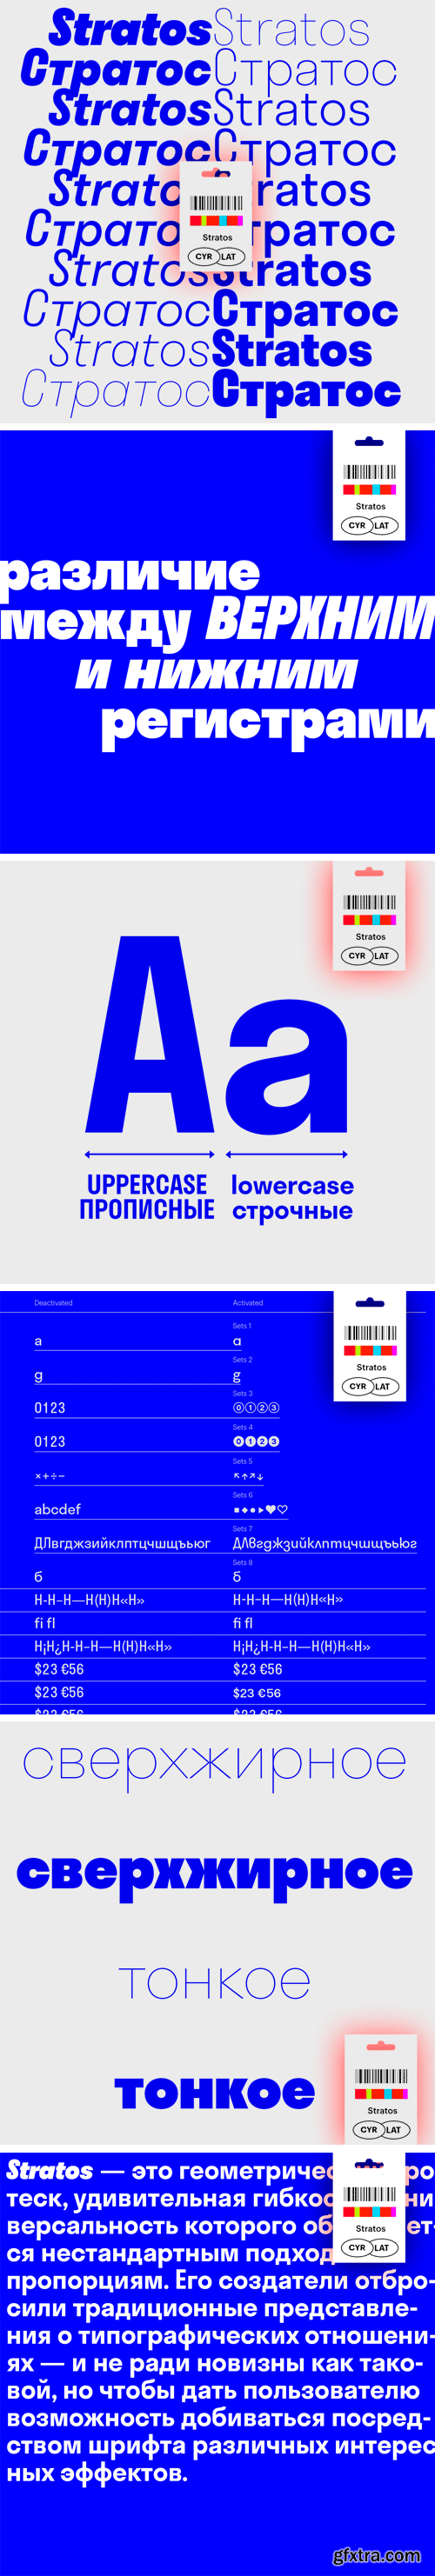 Stratos Font Family [Updated] - Cyrillic Support